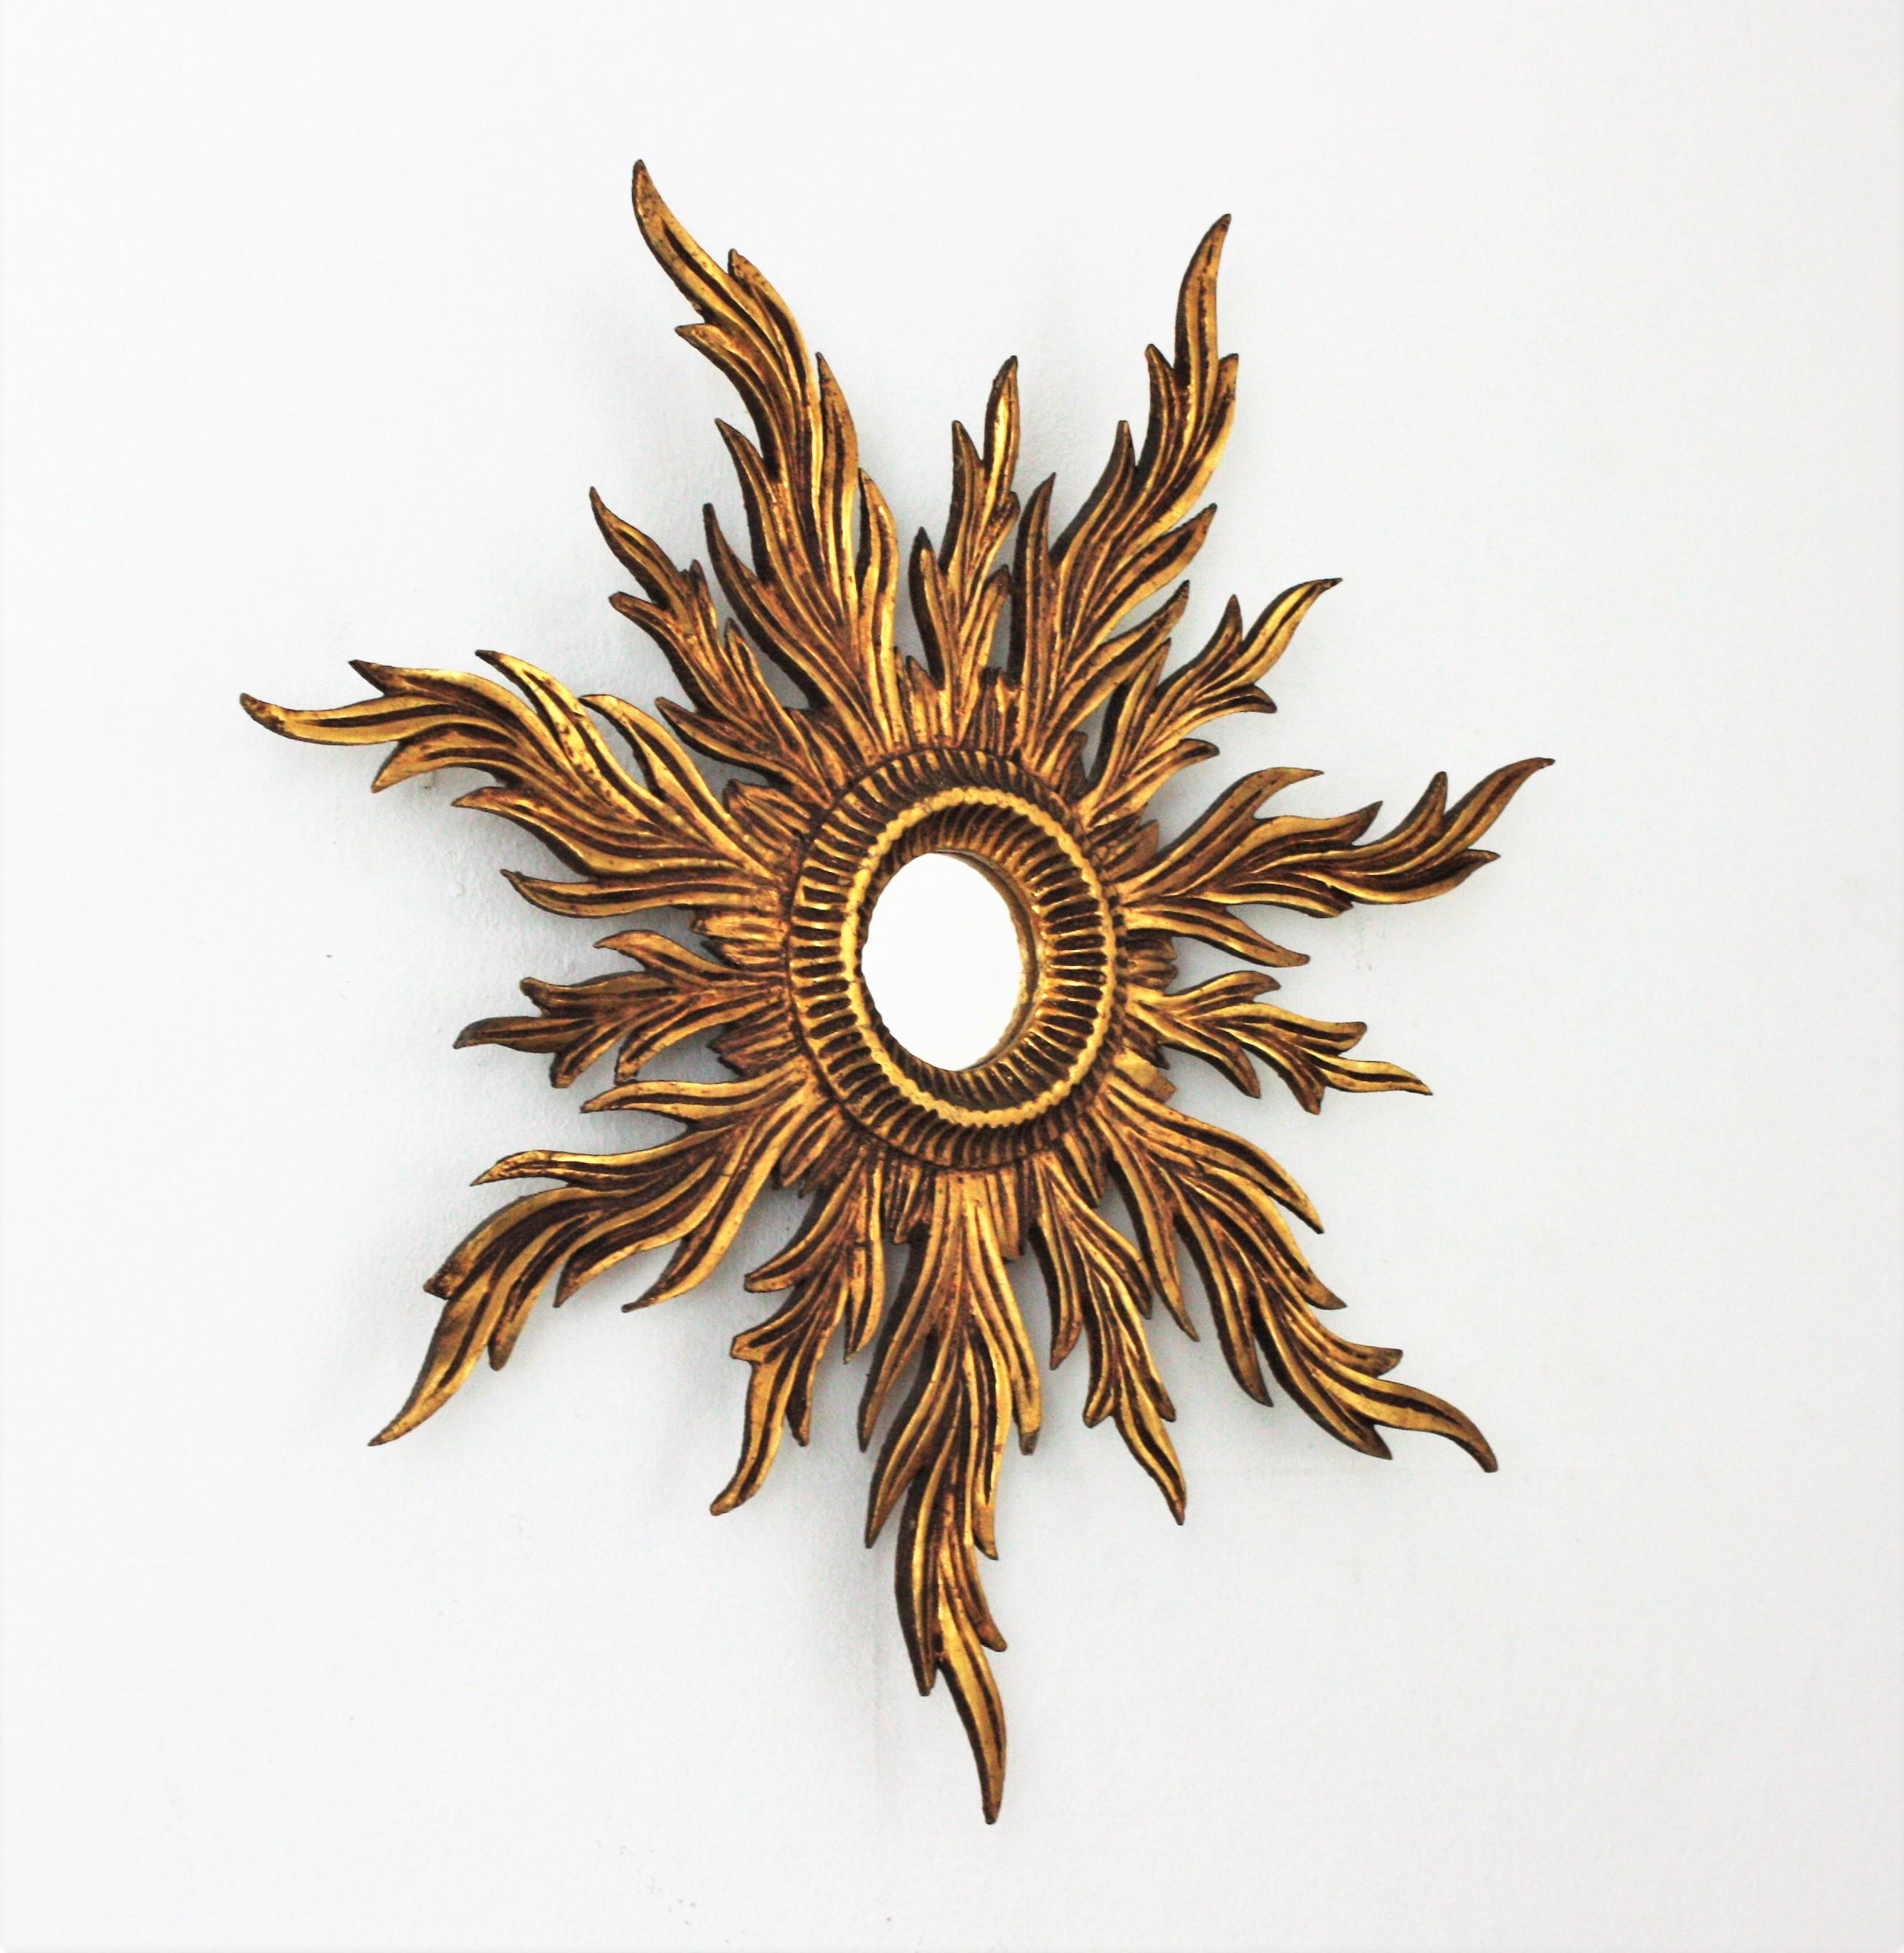 Hand-Carved French Sunburst Giltwood Mirror, Early 20th Century